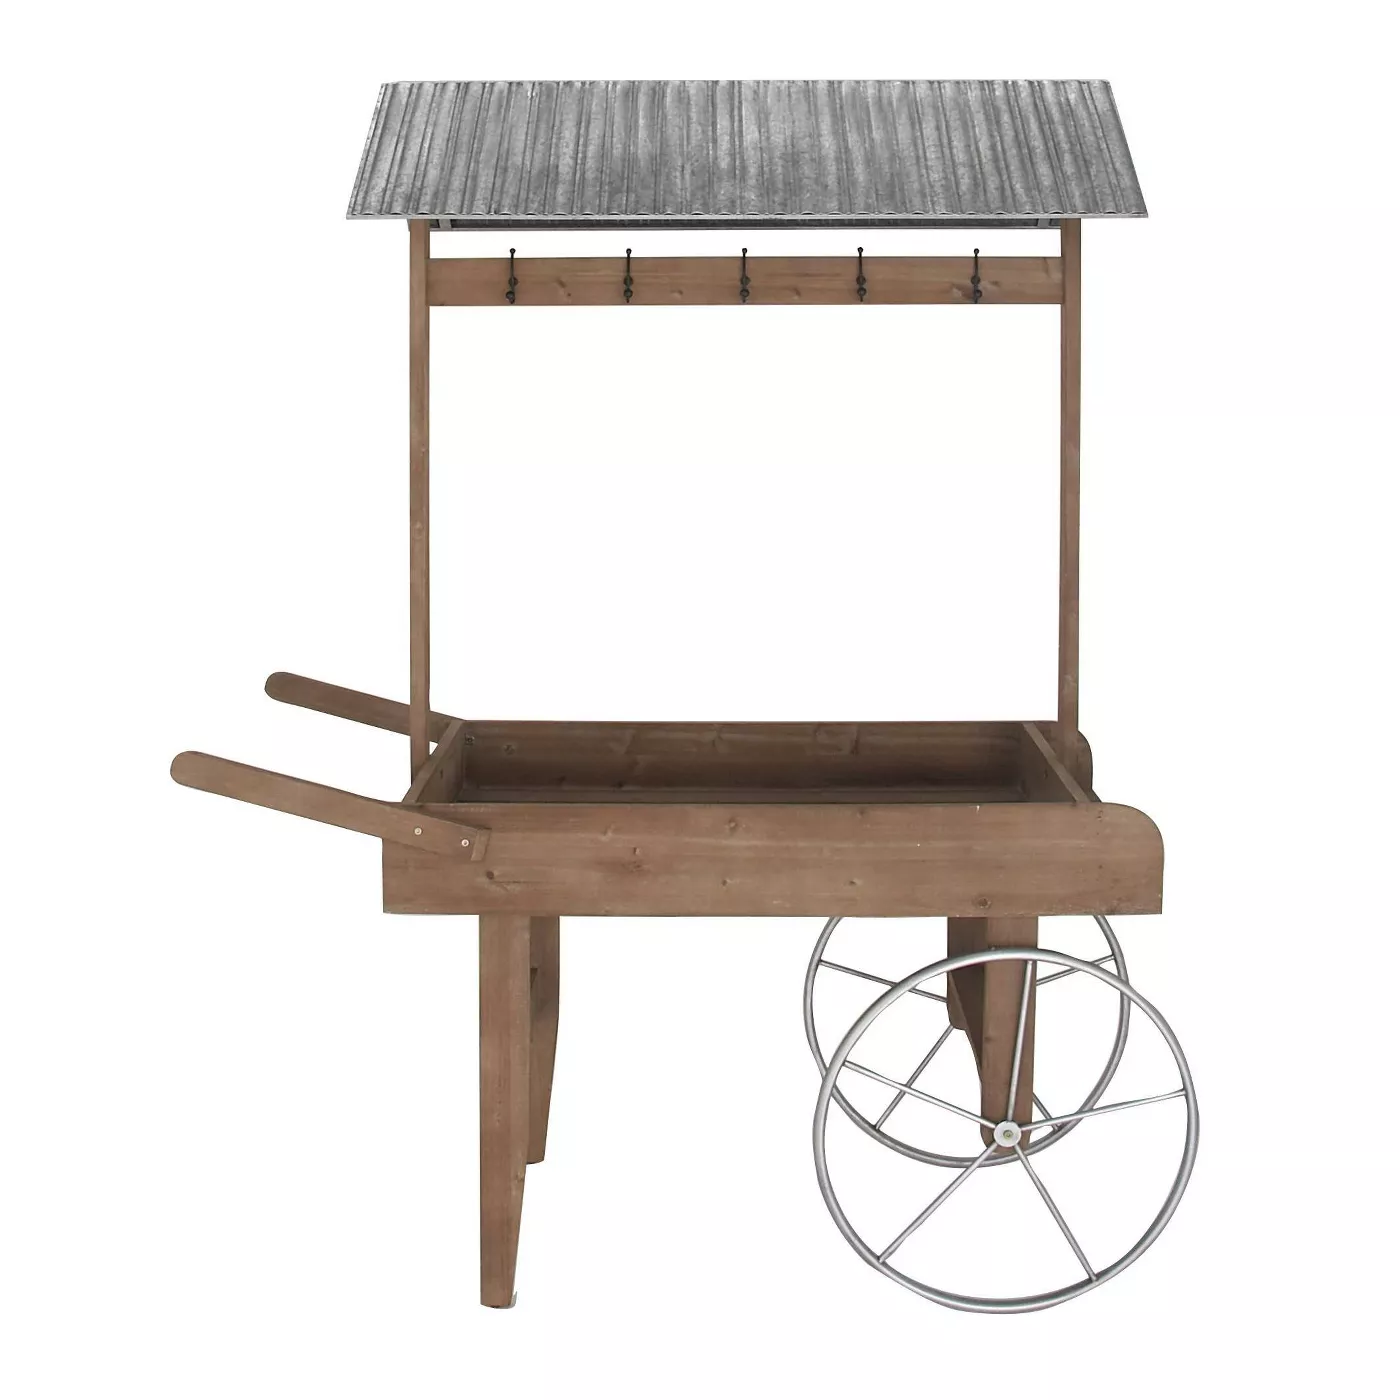 75" Farmhouse Wood and Iron Roofed Flower Cart Brown - Olivia & May - image 1 of 4